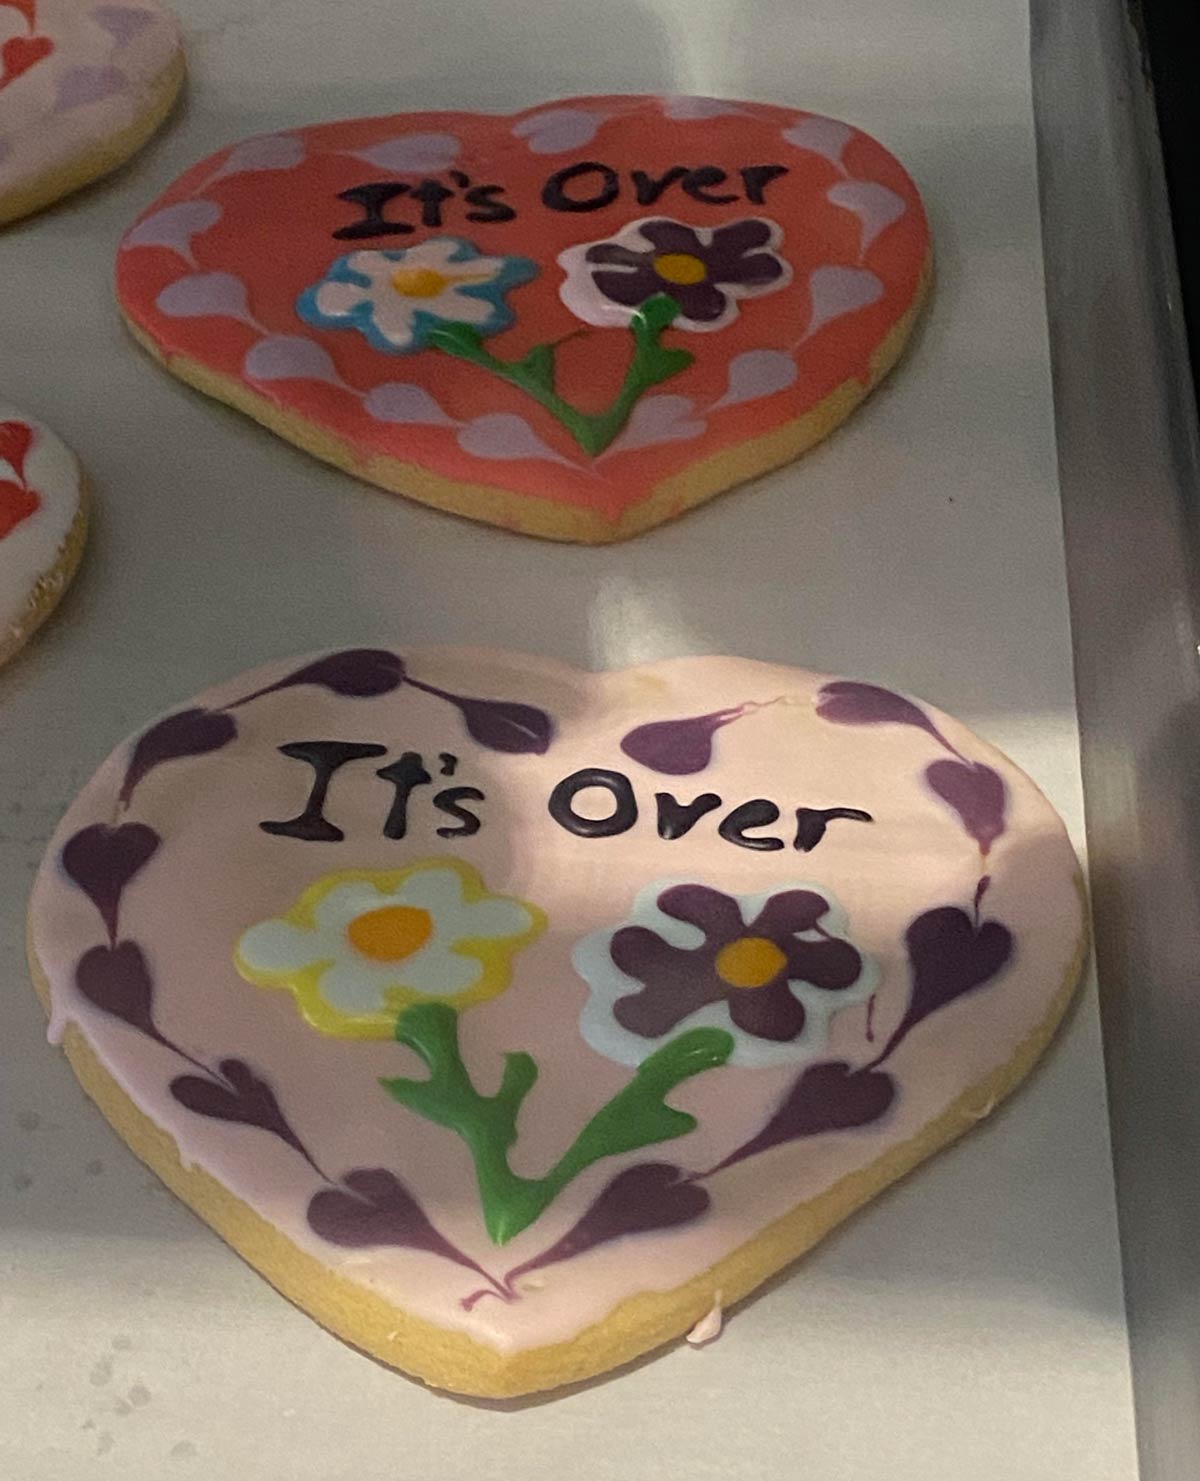 My local cafe's "Valentine's" cookies